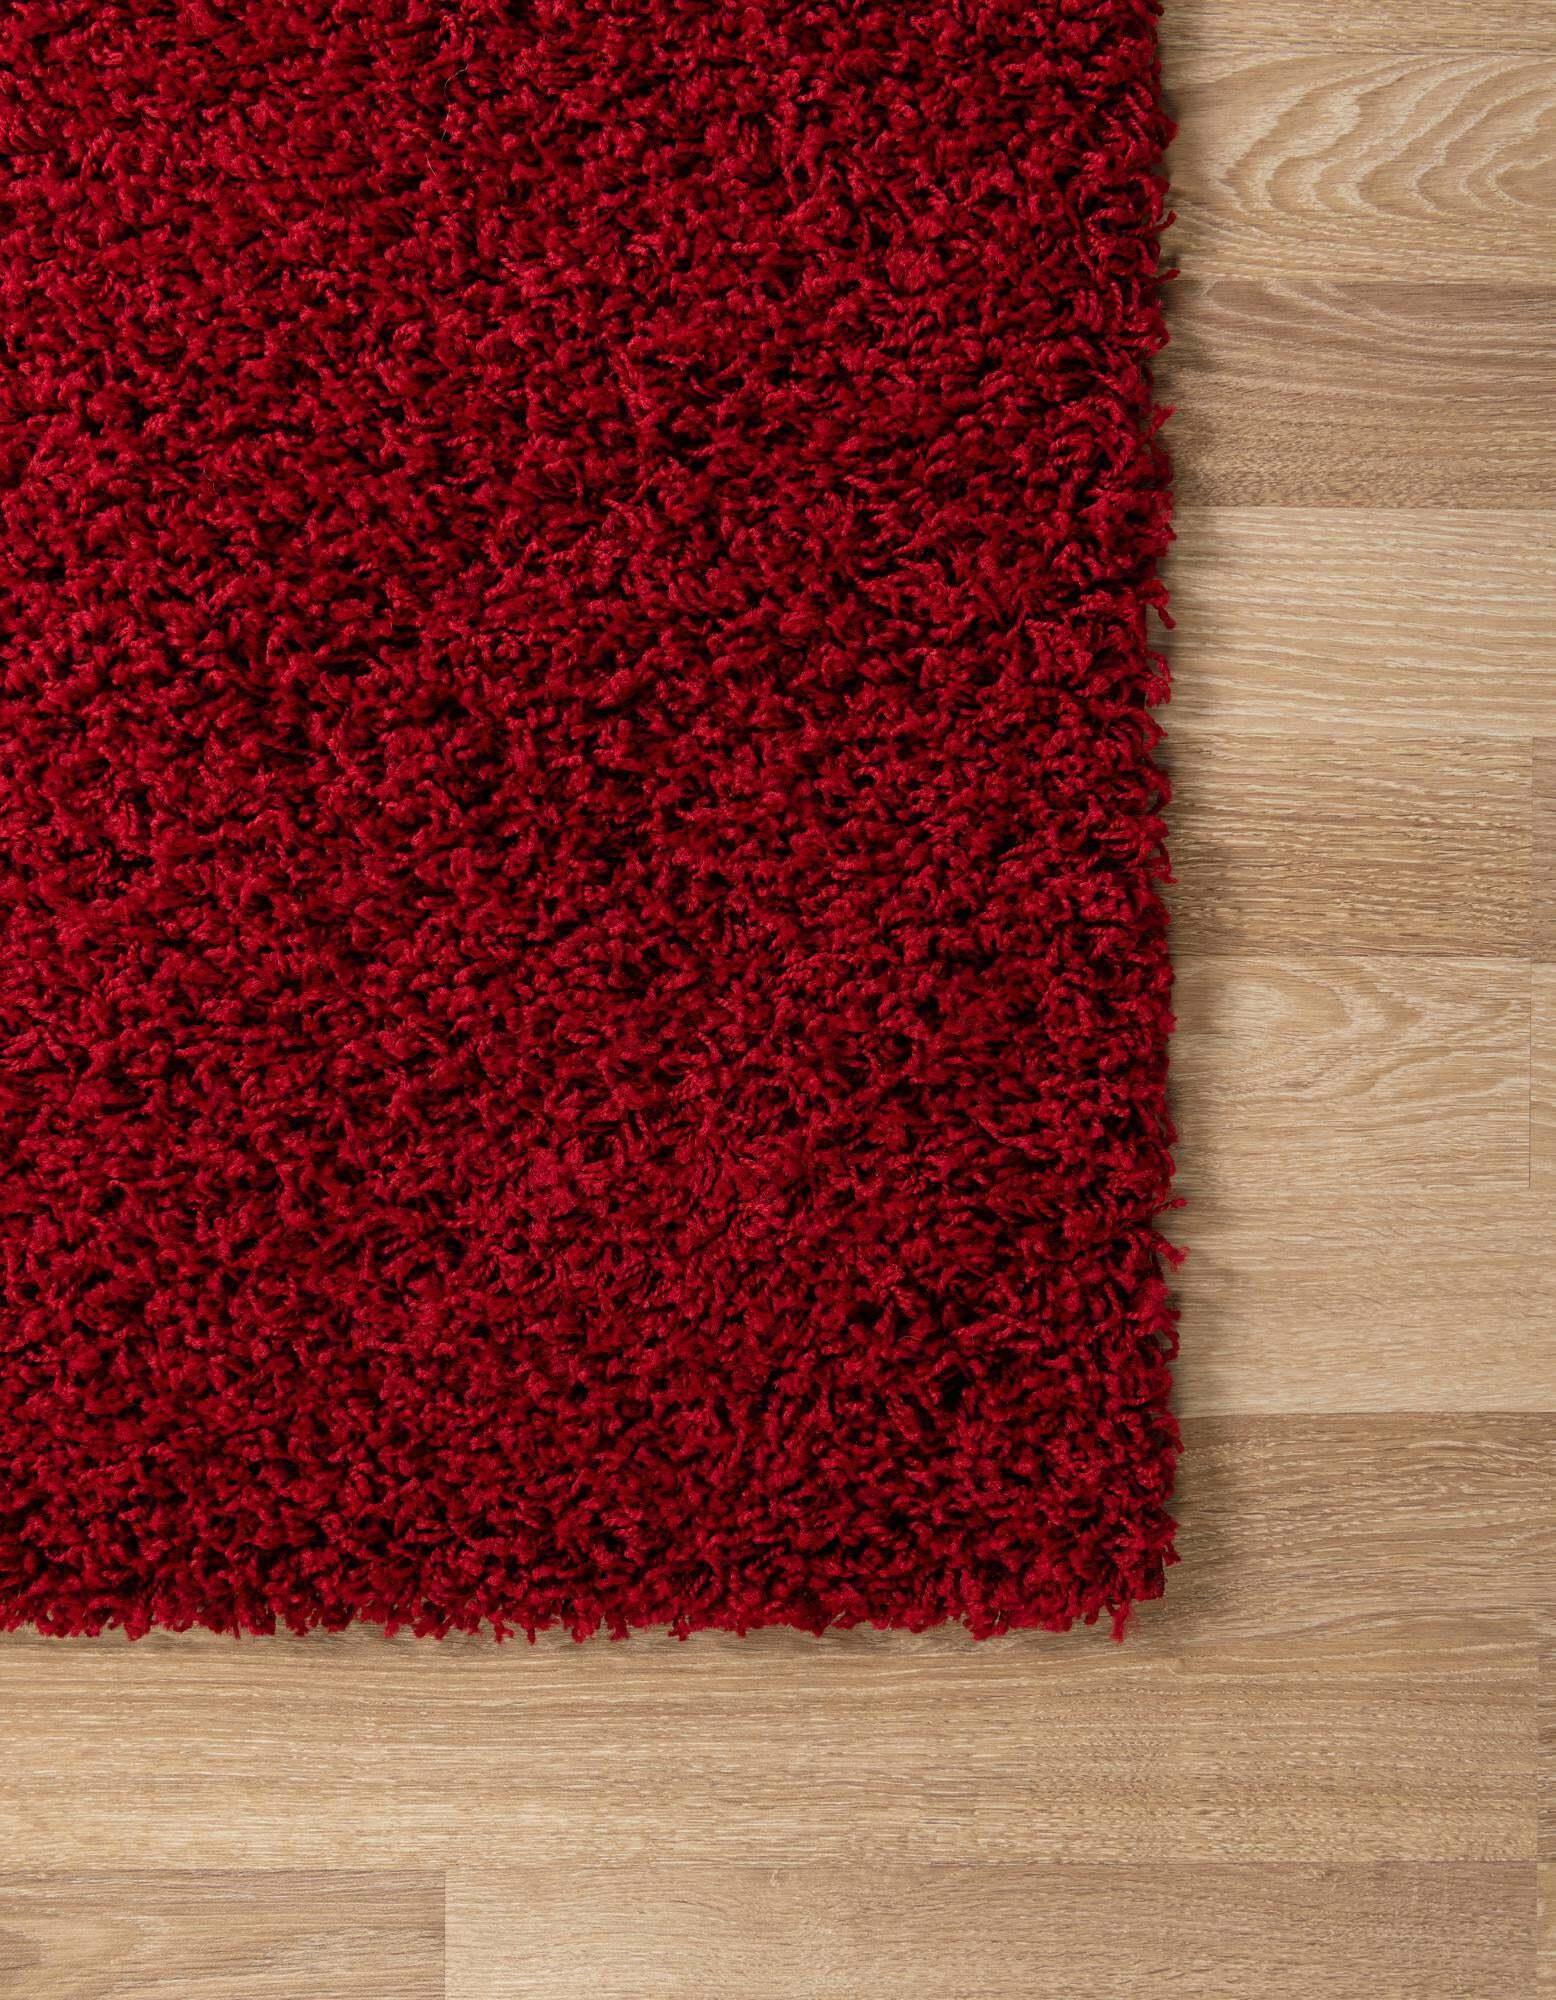 Unique Loom Indoor Rugs - Solid Shag Solid Rectangular 8x11 Rug Cherry Red